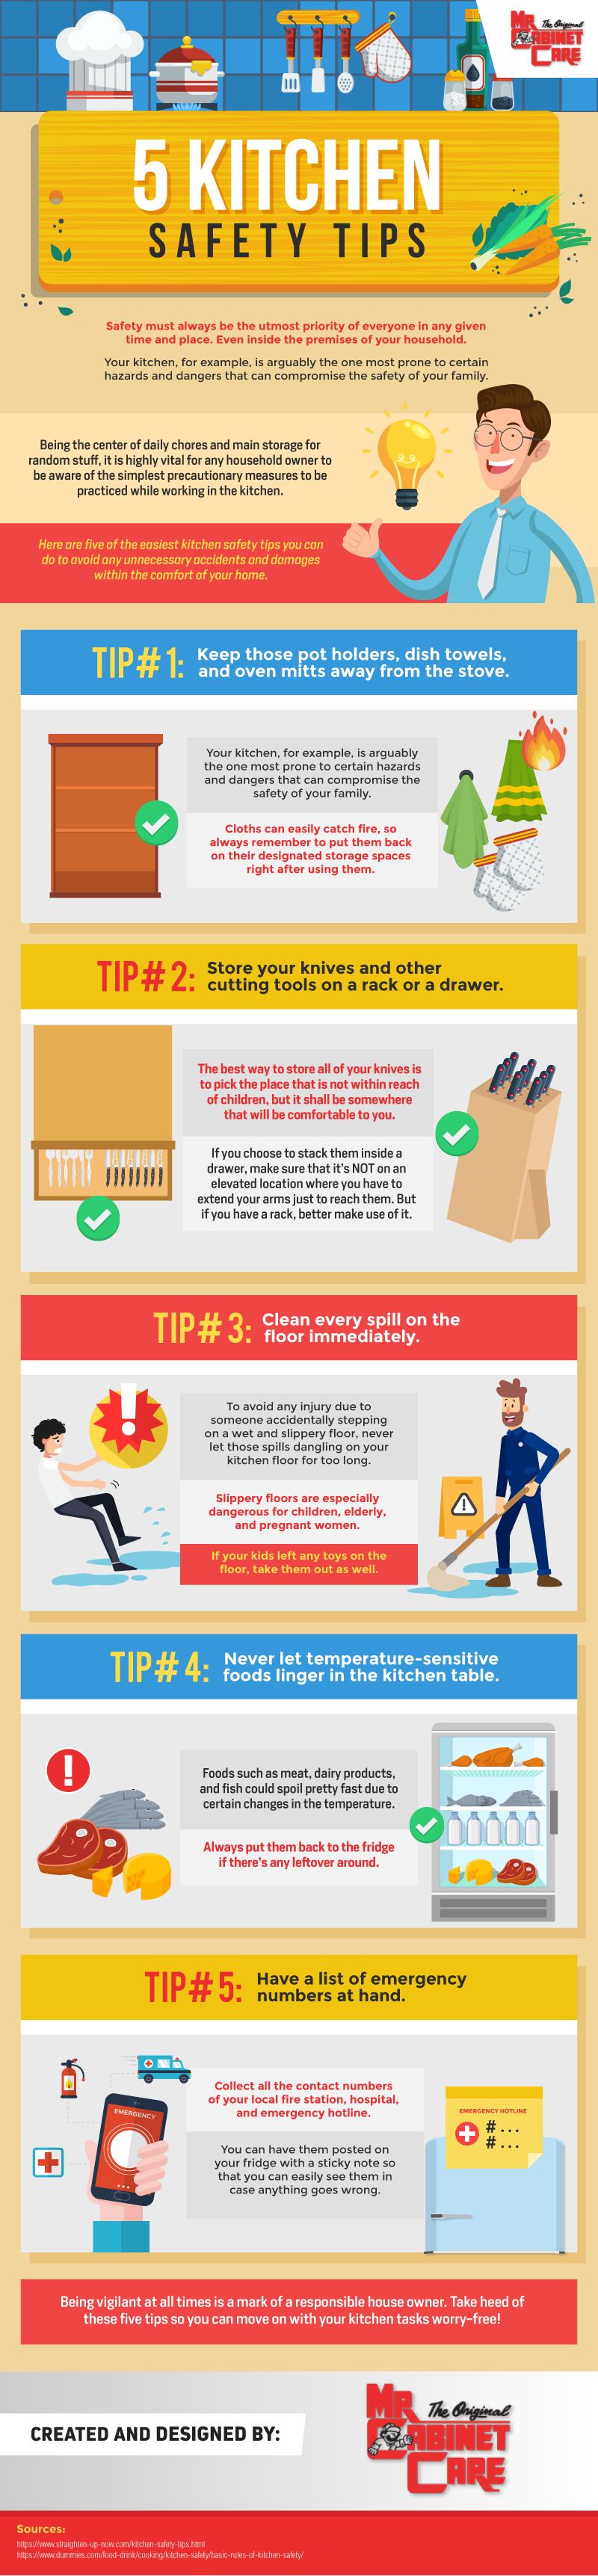 5-kitchen-safety-tips-infographic